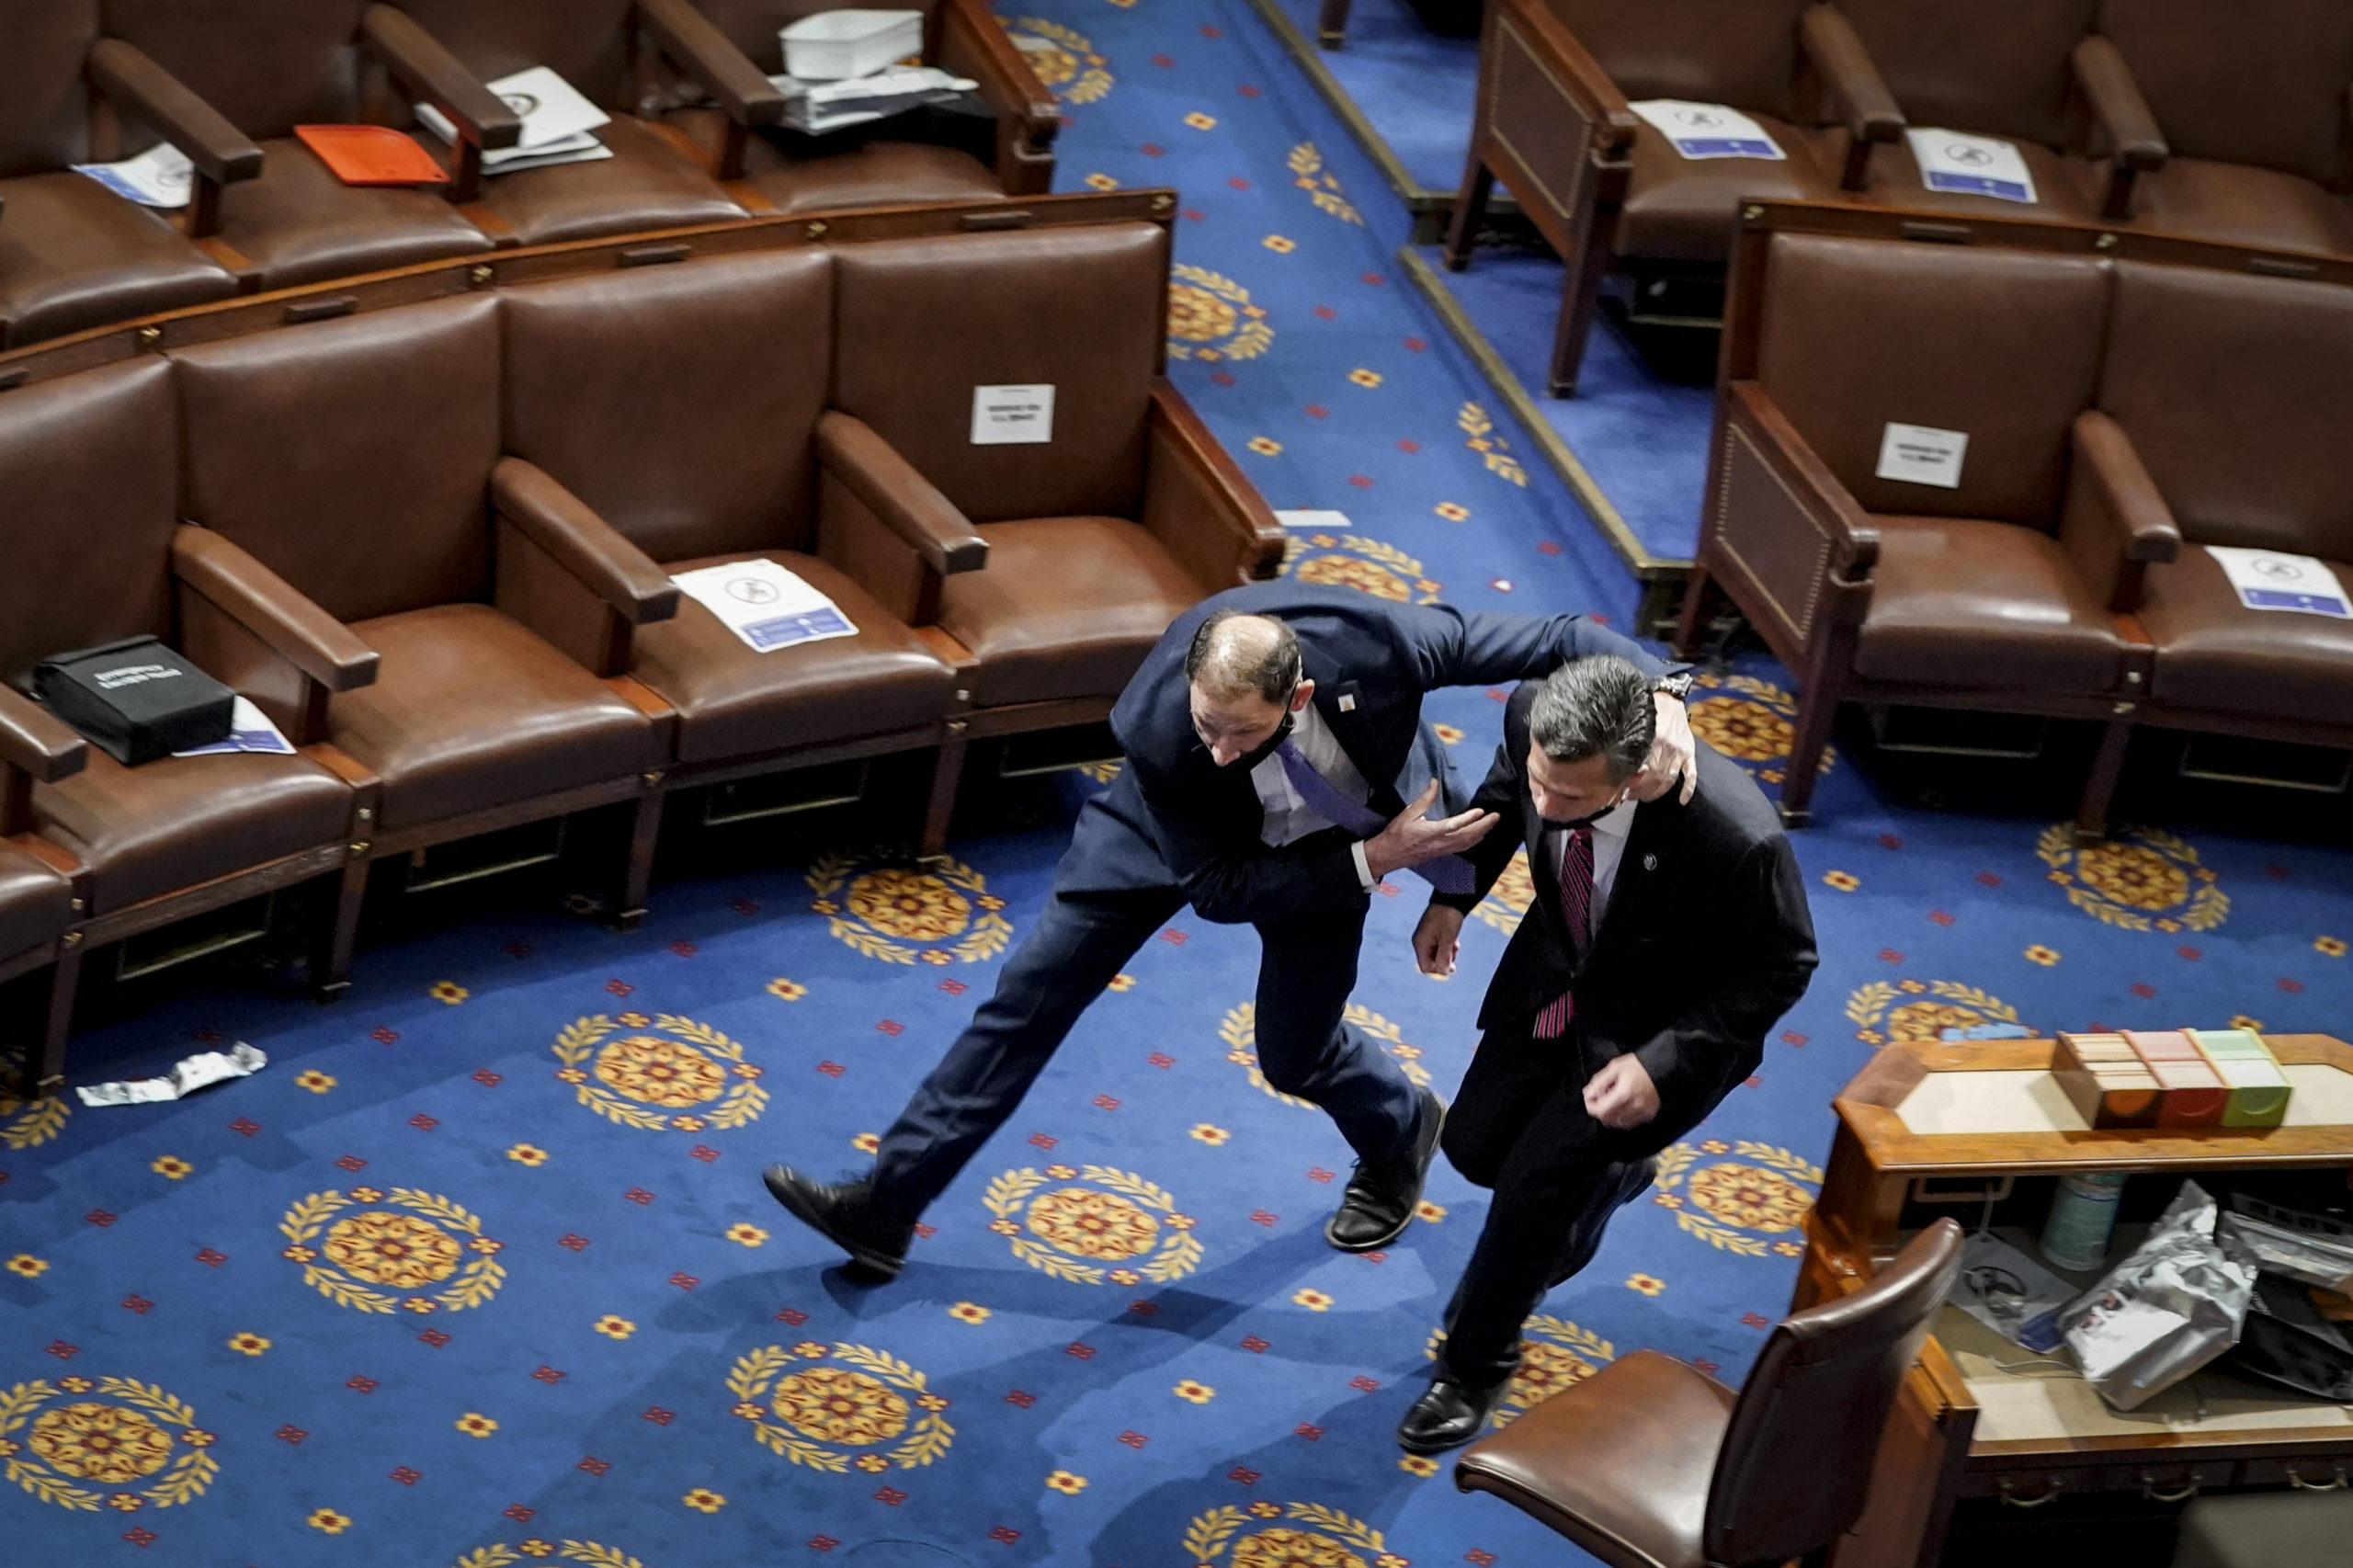 WASHINGTON, DC - JANUARY 06: A member of the U.S. Capitol police rushes Rep. Dan Meuser (R-PA) out of the House Chamber as protesters try to enter the House Chamber during a joint session of Congress on January 06, 2021 in Washington, DC. Congress held a joint session today to ratify President-elect Joe Biden's 306-232 Electoral College win over President Donald Trump. A group of Republican senators said they would reject the Electoral College votes of several states unless Congress appointed a commission to audit the election results. (Photo by Drew Angerer/Getty Images)